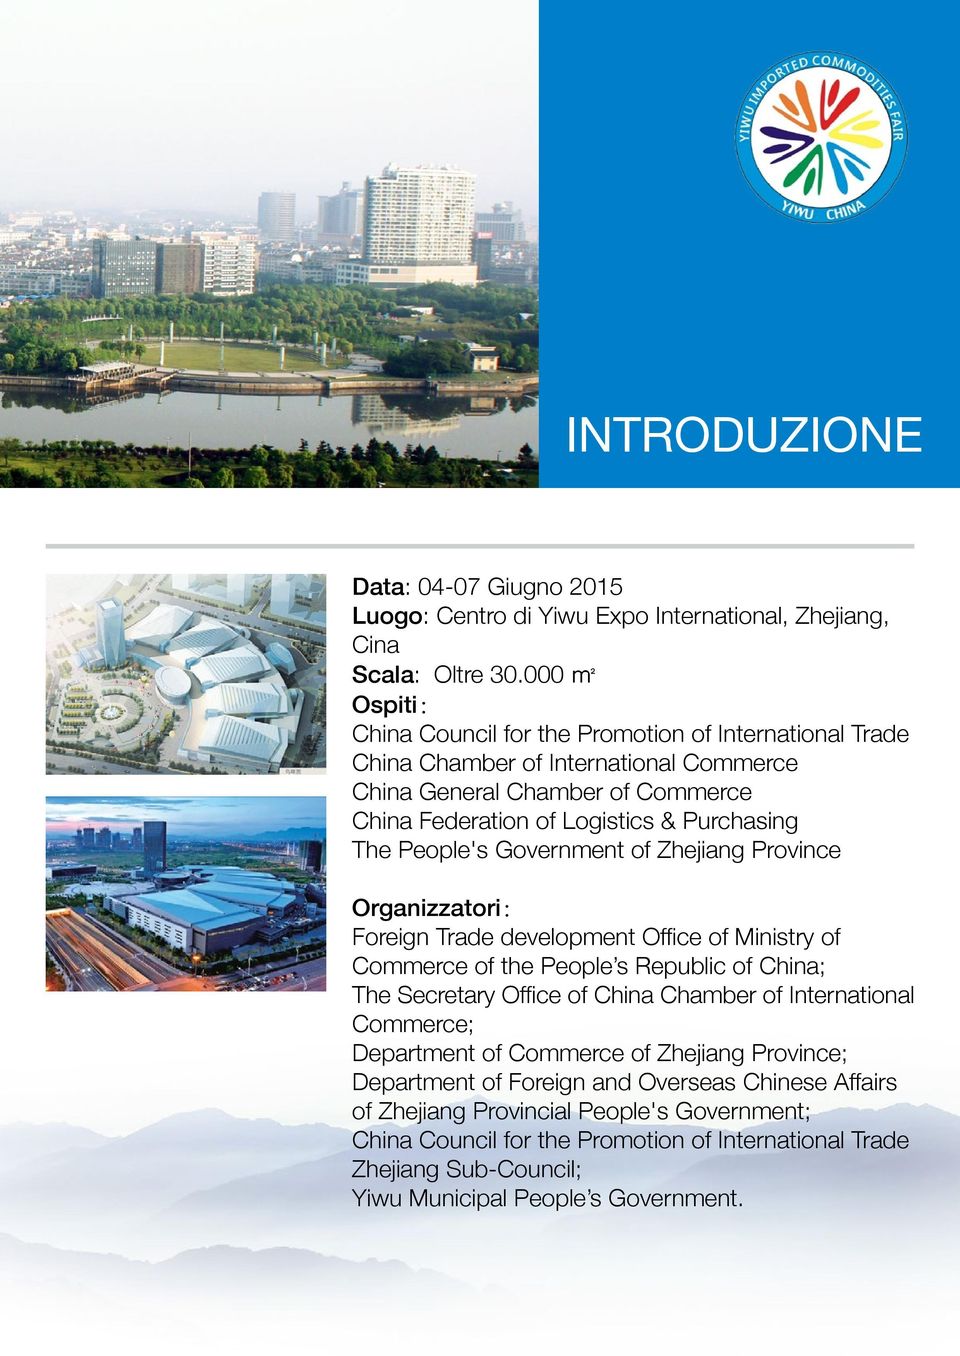 People's Government of Zhejiang Province Organizzatori: Foreign Trade development Office of Ministry of Commerce of the People s Republic of China; The Secretary Office of China Chamber of